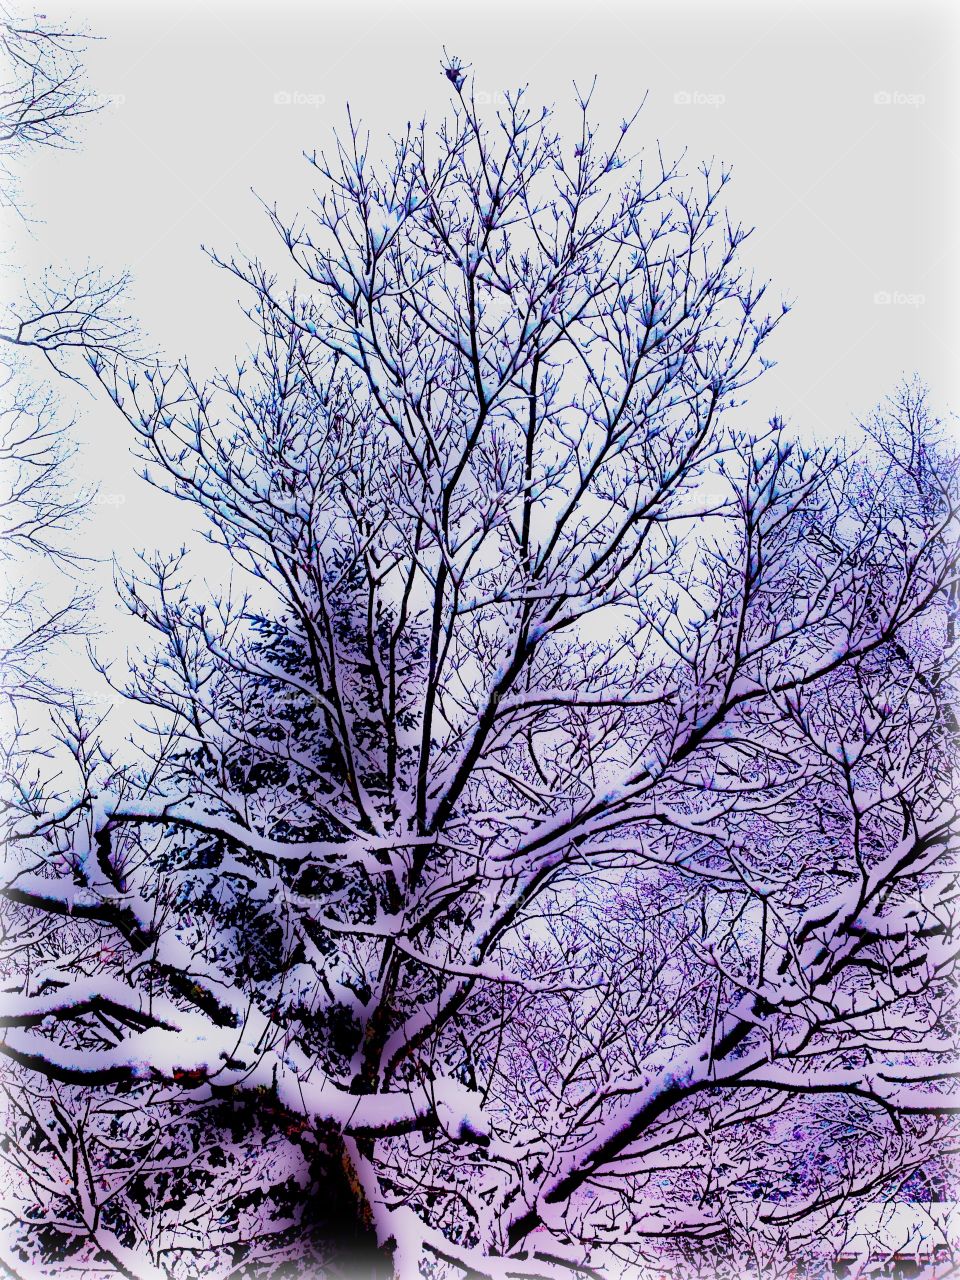 View of tree covered with snow